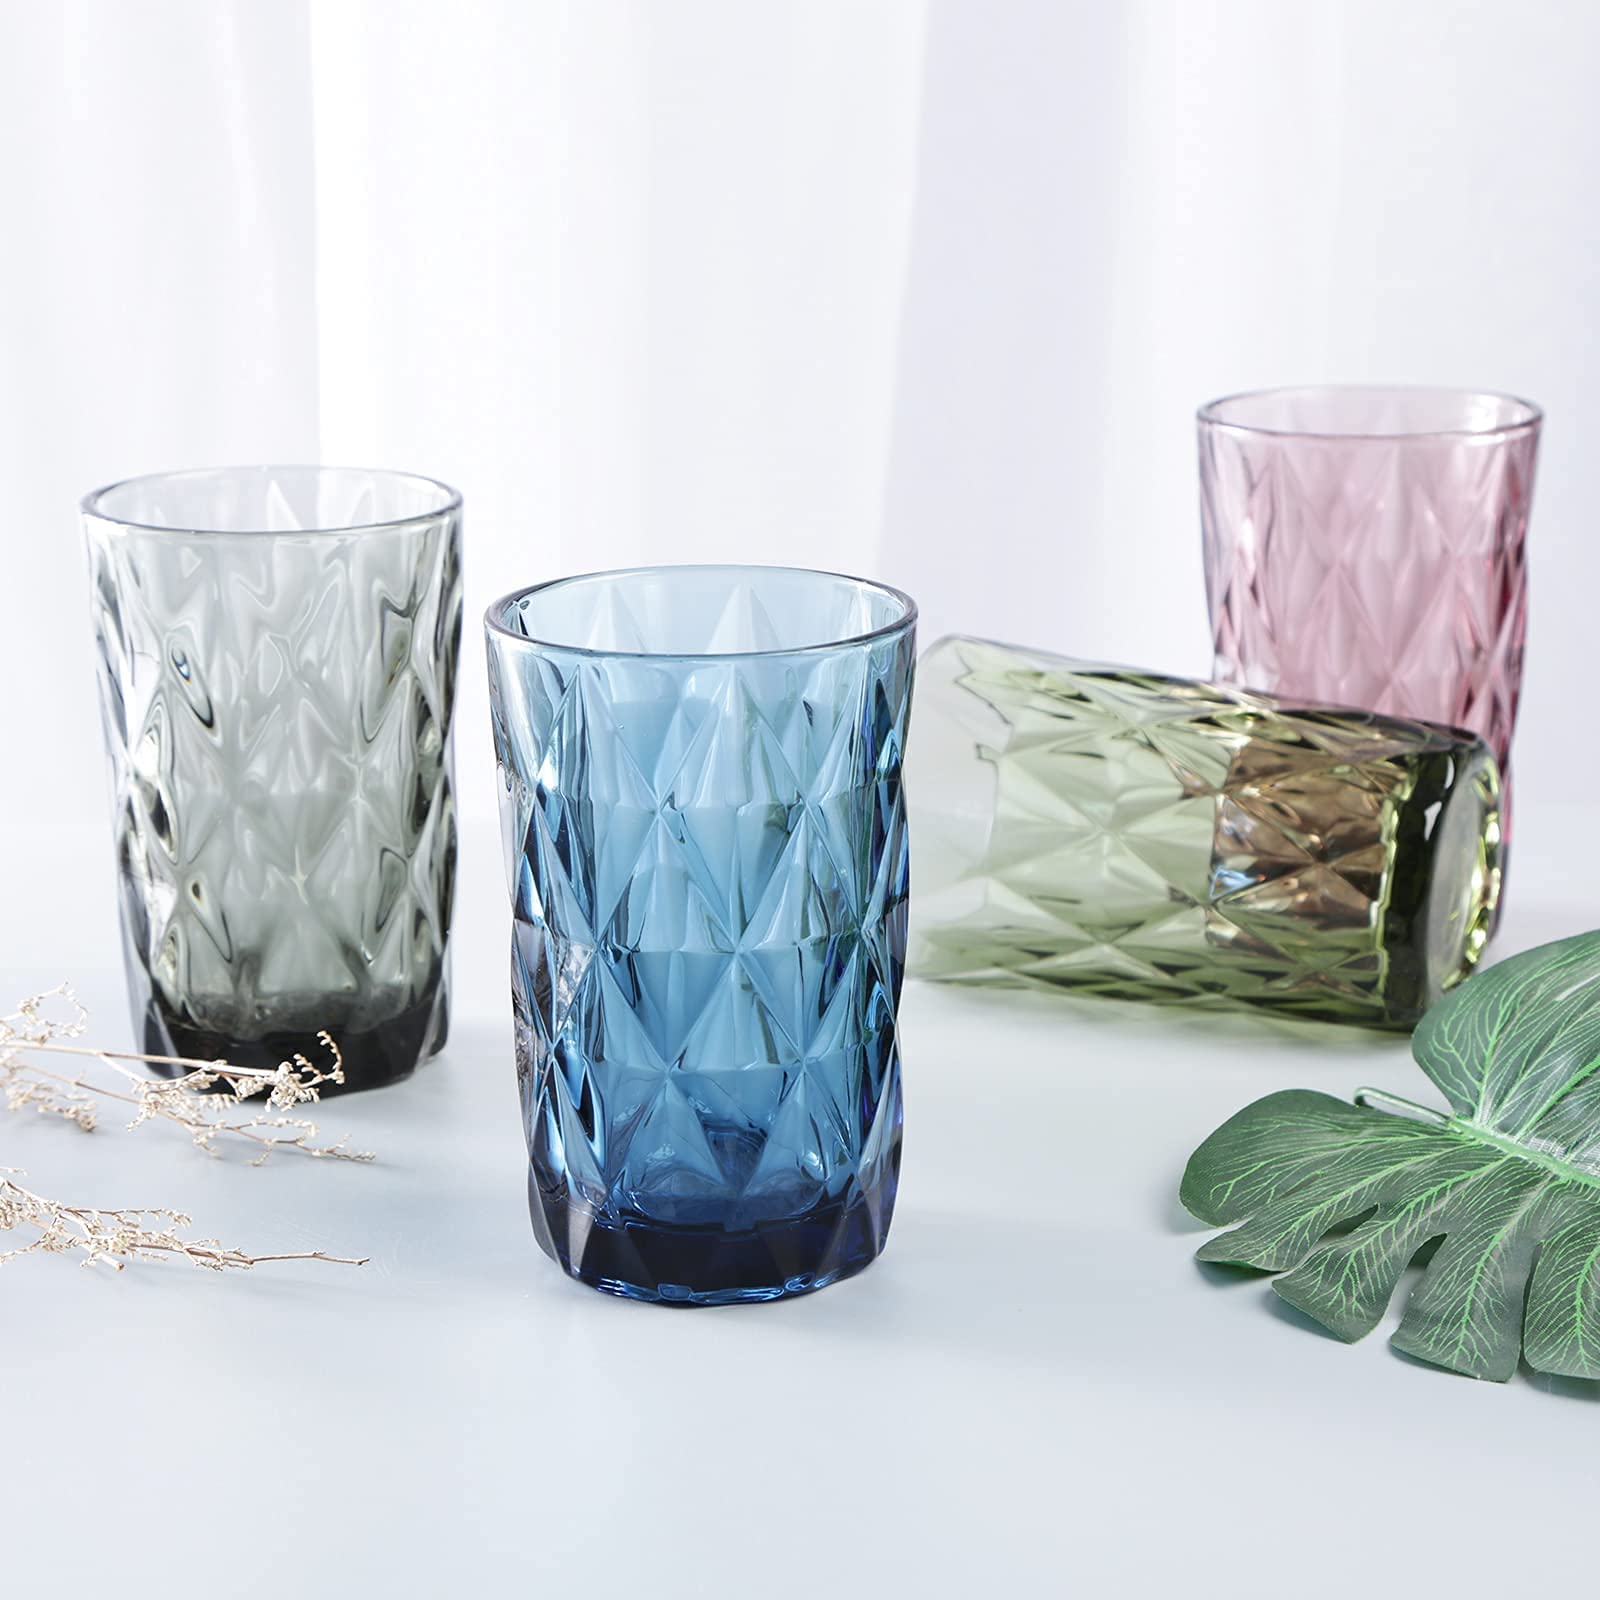 Bandesun Drinking Glass set of 6 Modern Glassware Diamond Pattern Tumbler Cup（12 OZ），for Water，Cocktail，Milk，Juice and Beverage